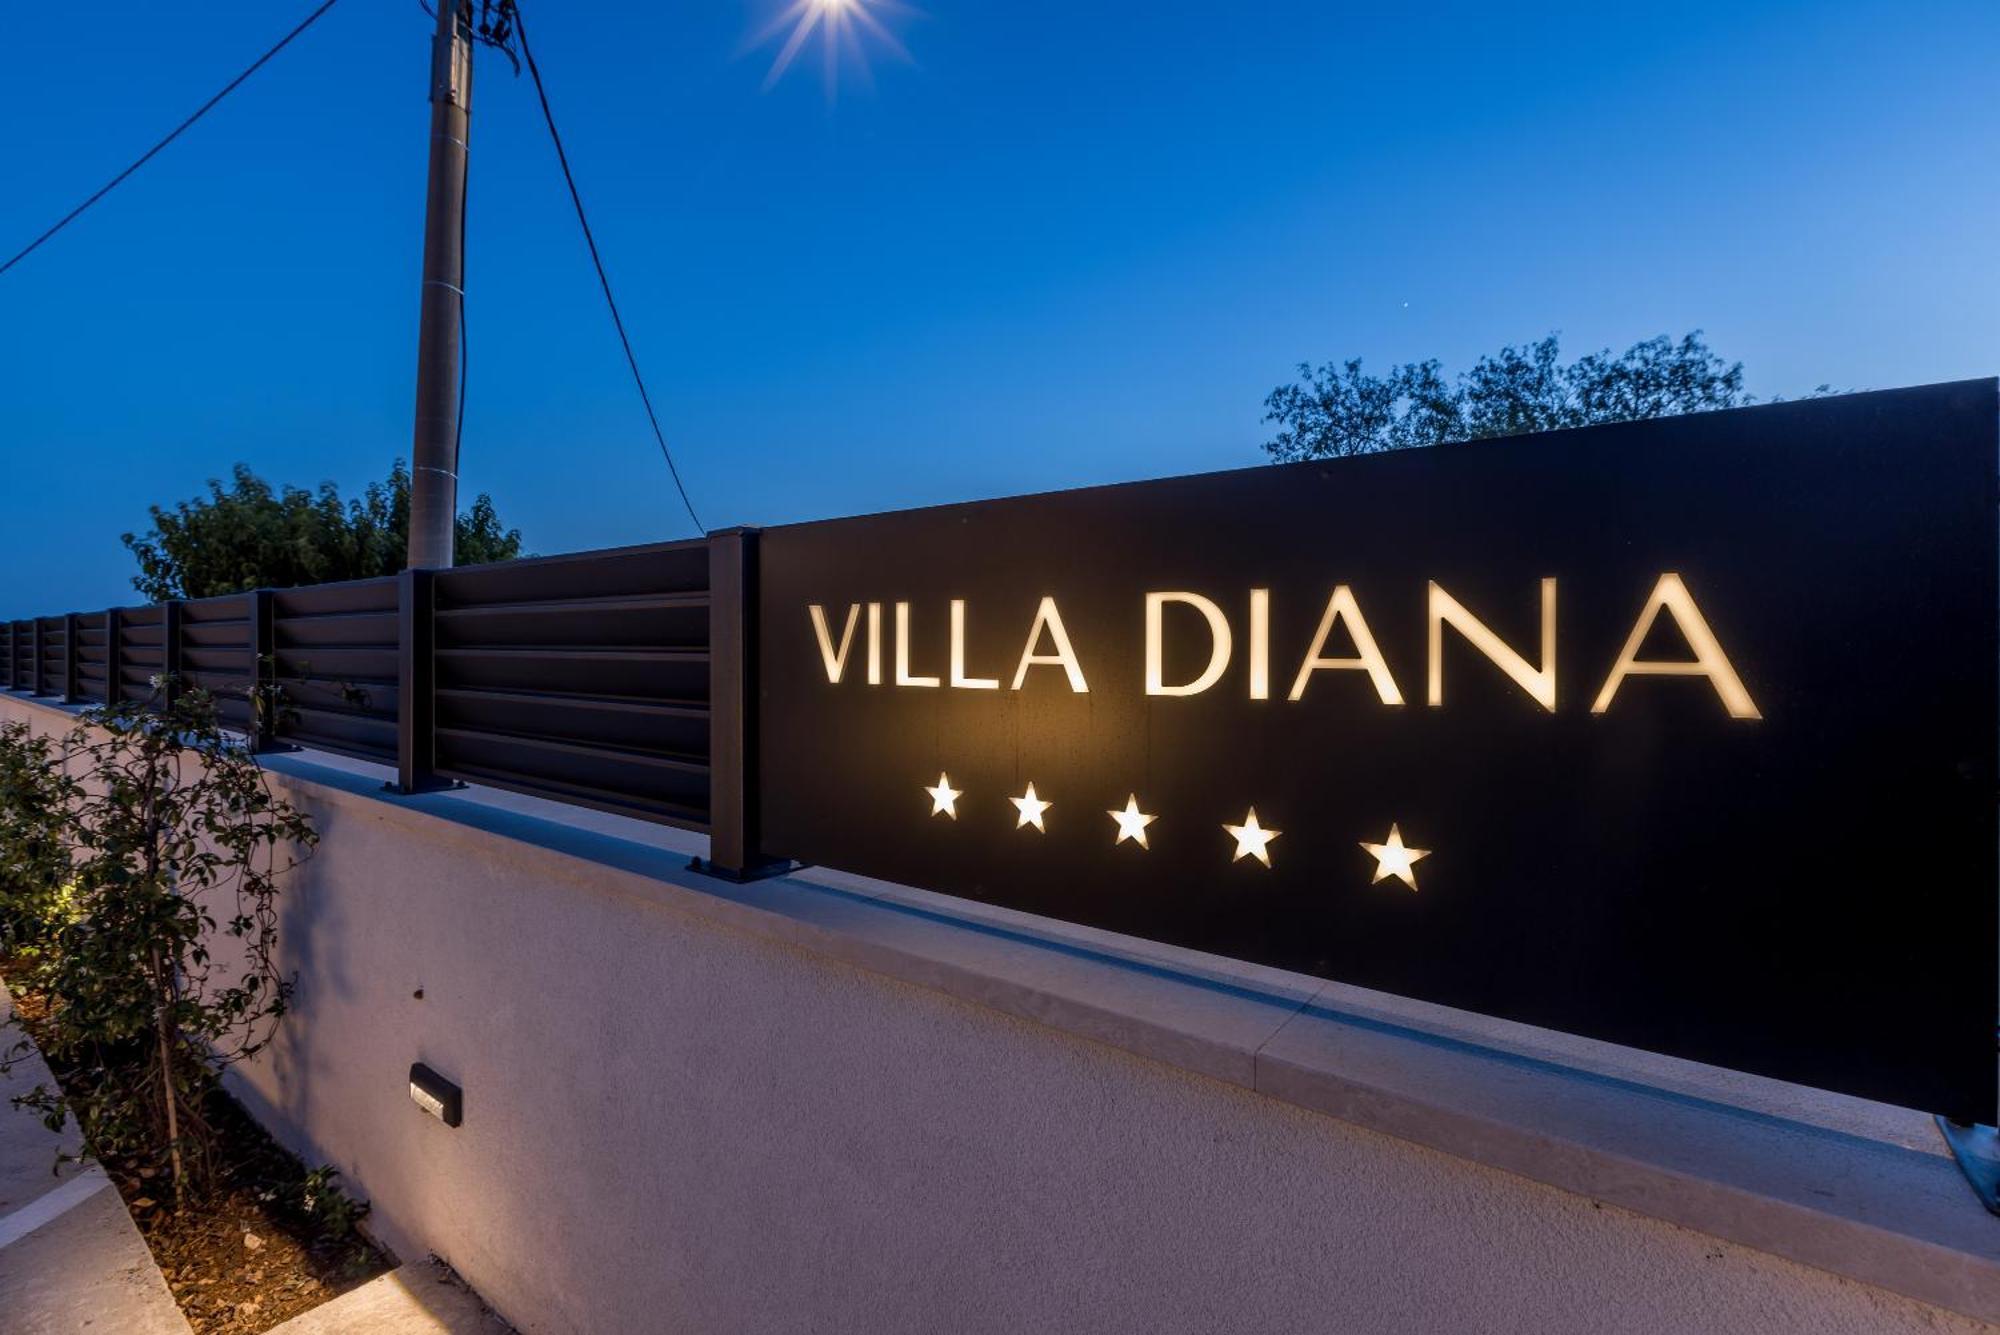 Luxury Villa Diana With Heated Pool And Jacuzzi Dograde 外观 照片